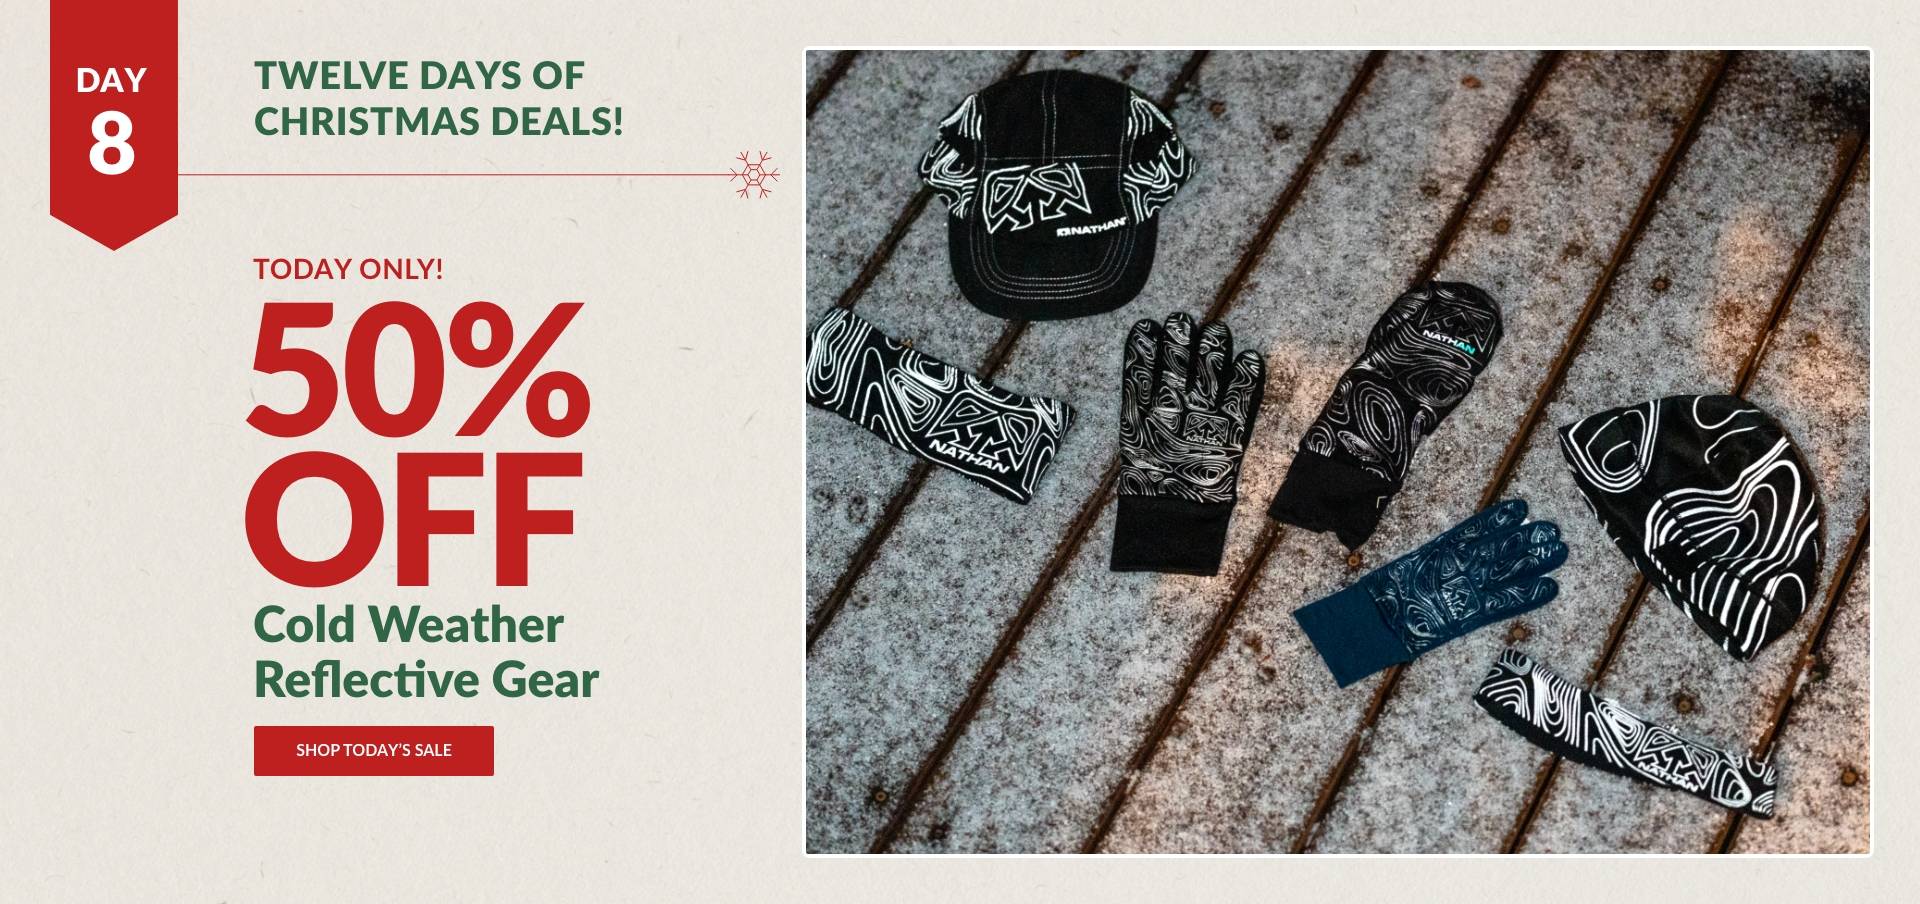 Today Only! 50% Off Cold Weather Reflective Gear Shop Today's Sale